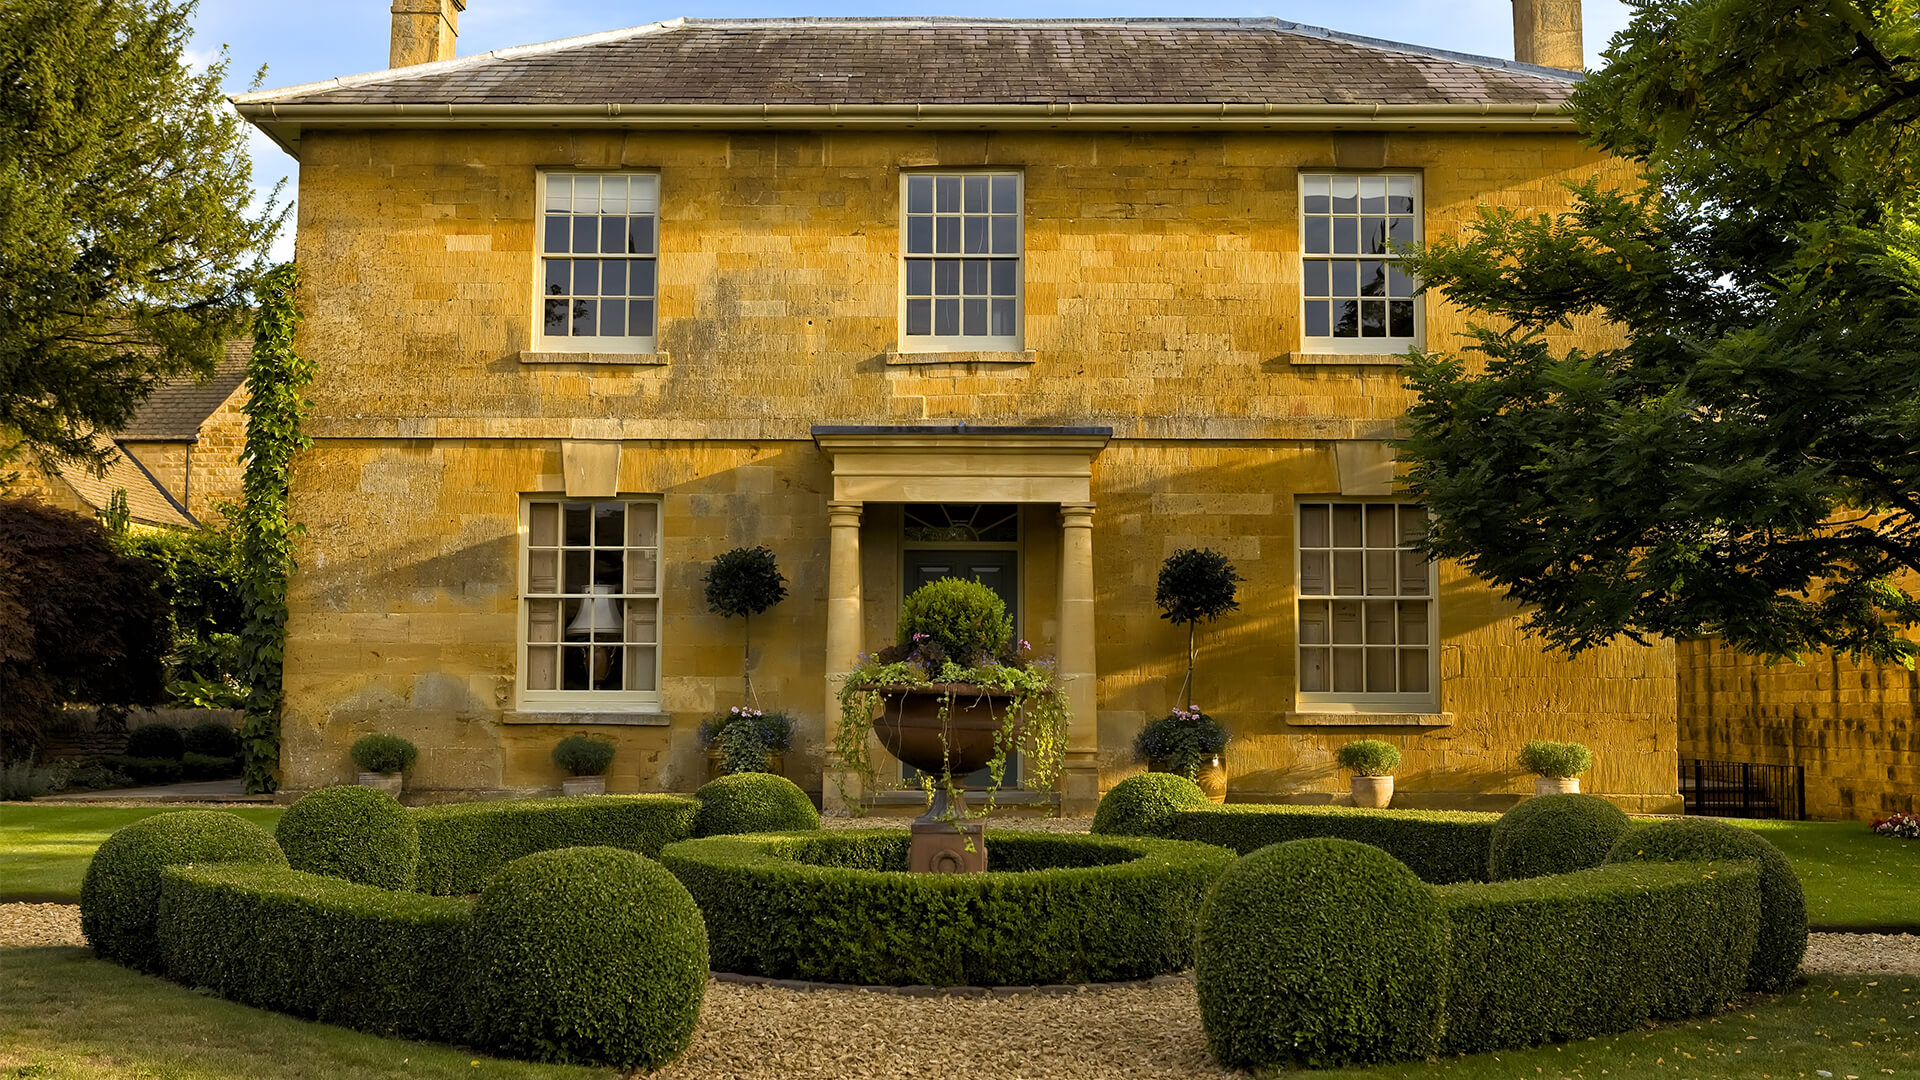 Traditional English Country House Interiors Lux Magazine